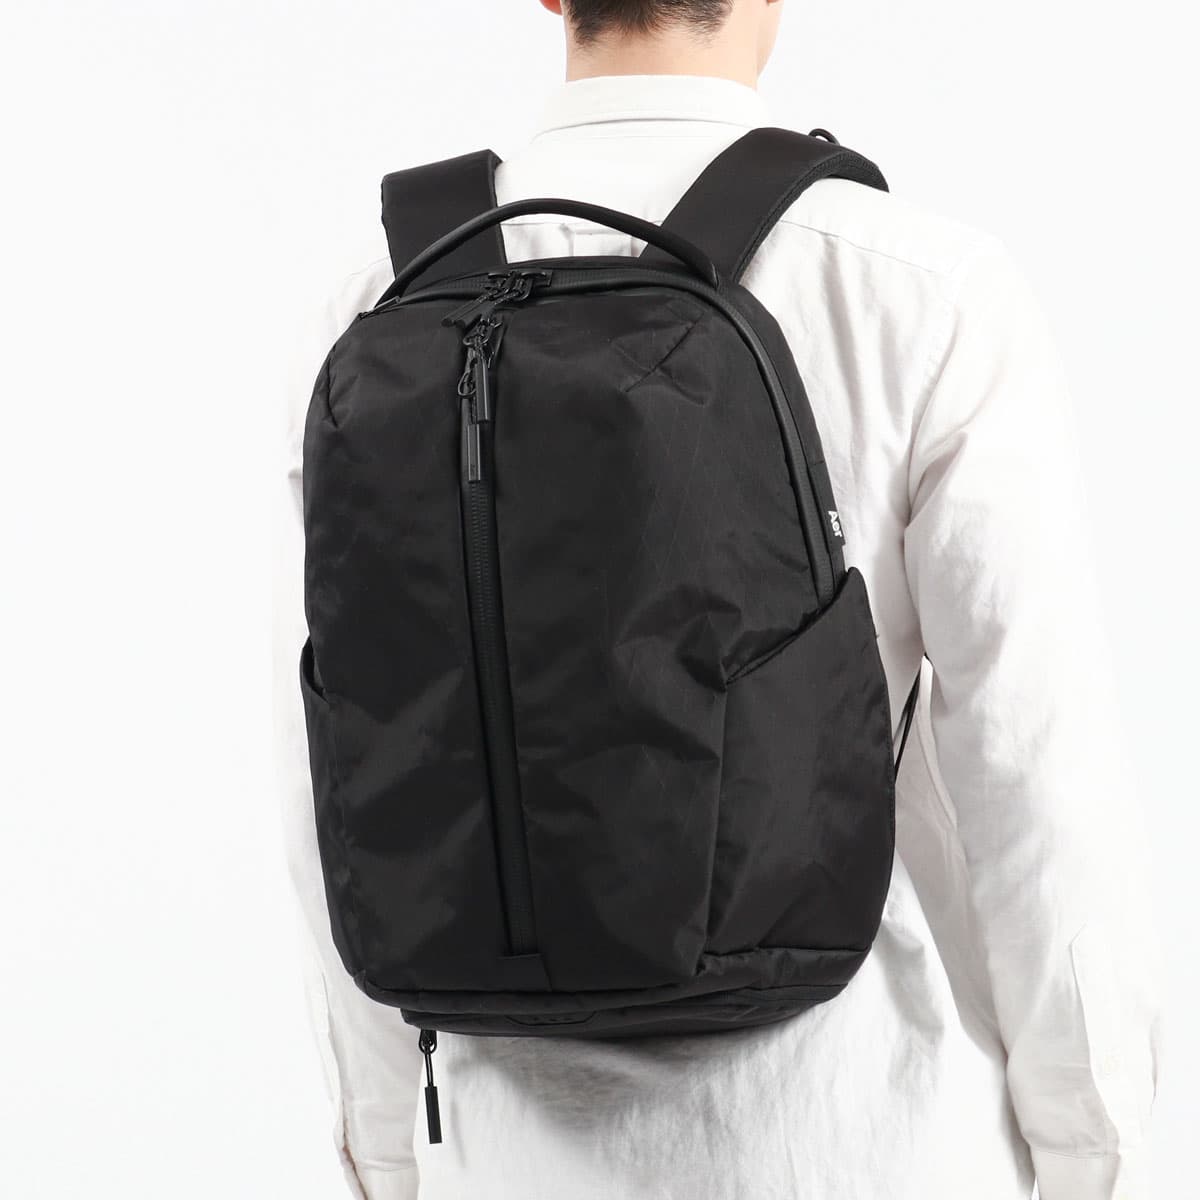 Aer エアー Active Collection Fit Pack 3 X-PAC バックパック 18.7L